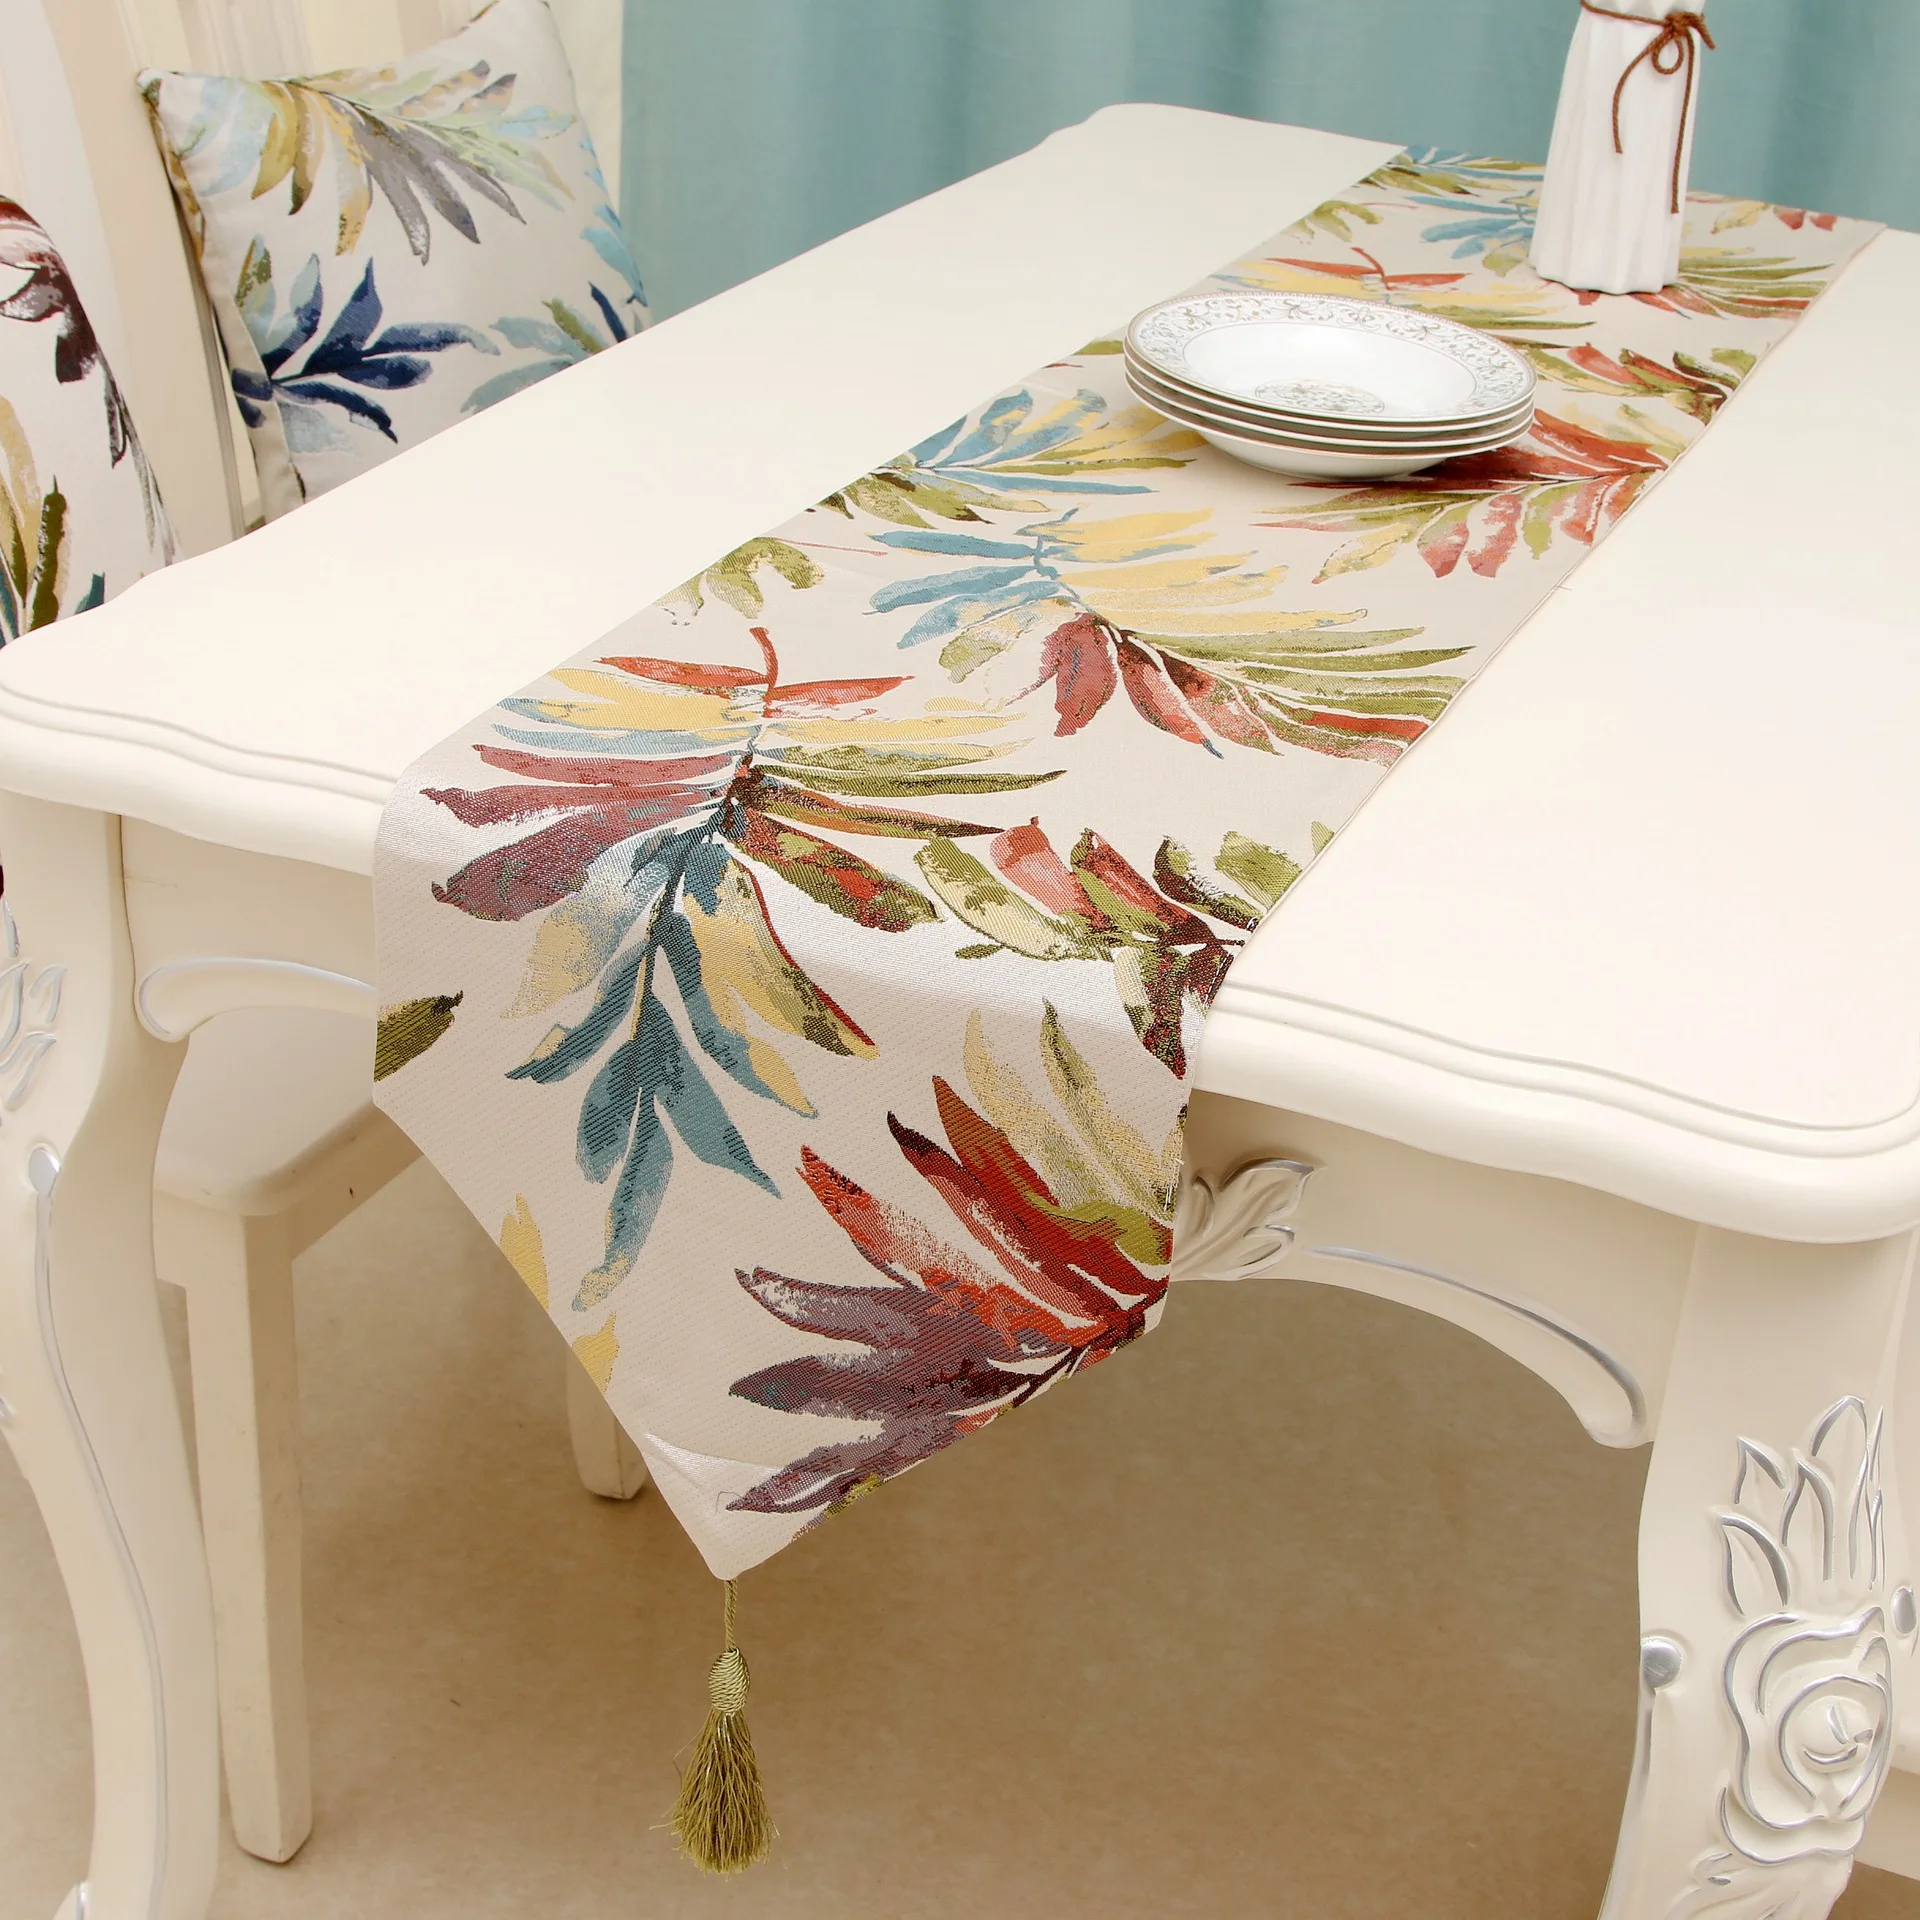 Inyahome Leaves Table Runner American Farmhouse Retro Colorful Leaves Tropical Rainforest Cotton and Linen for Dining Table